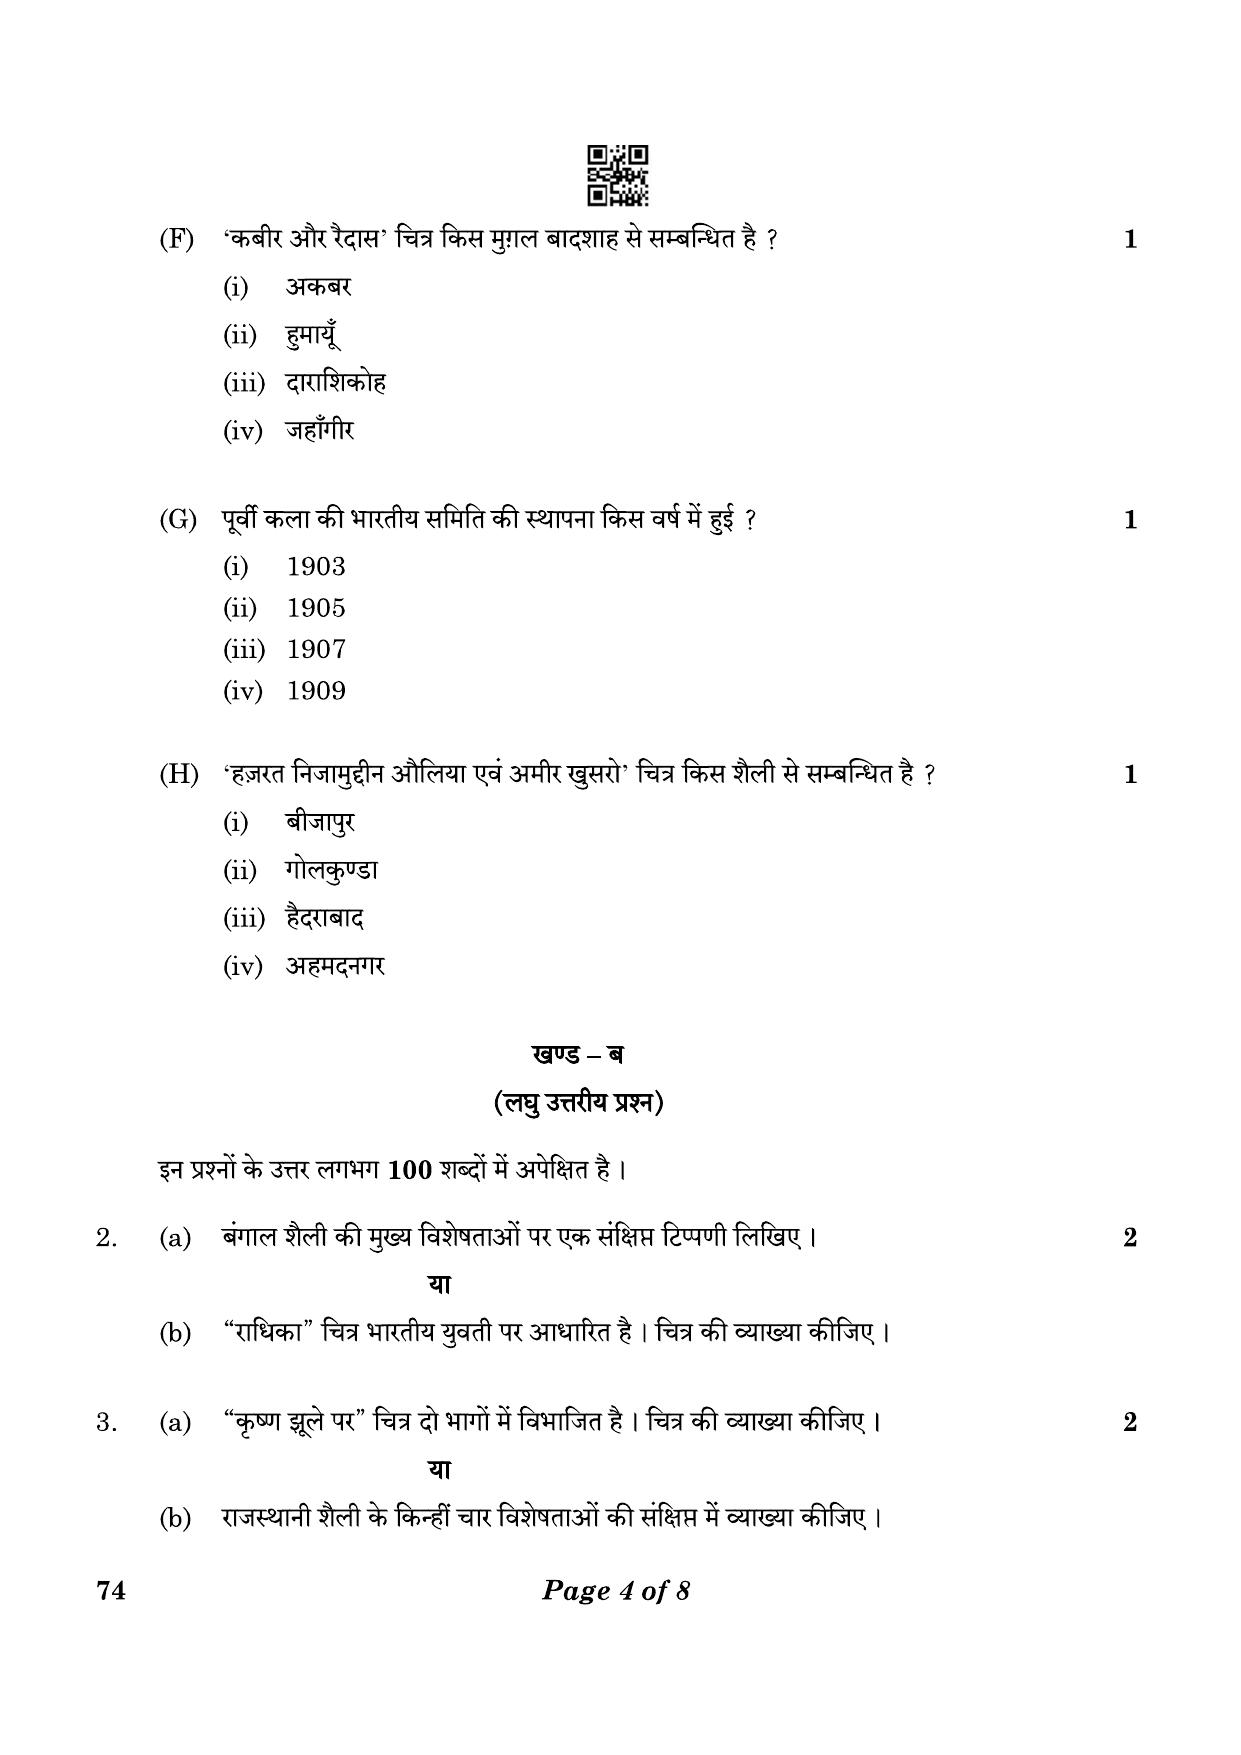 CBSE Class 12 74_Graphics 2023 Question Paper - Page 4